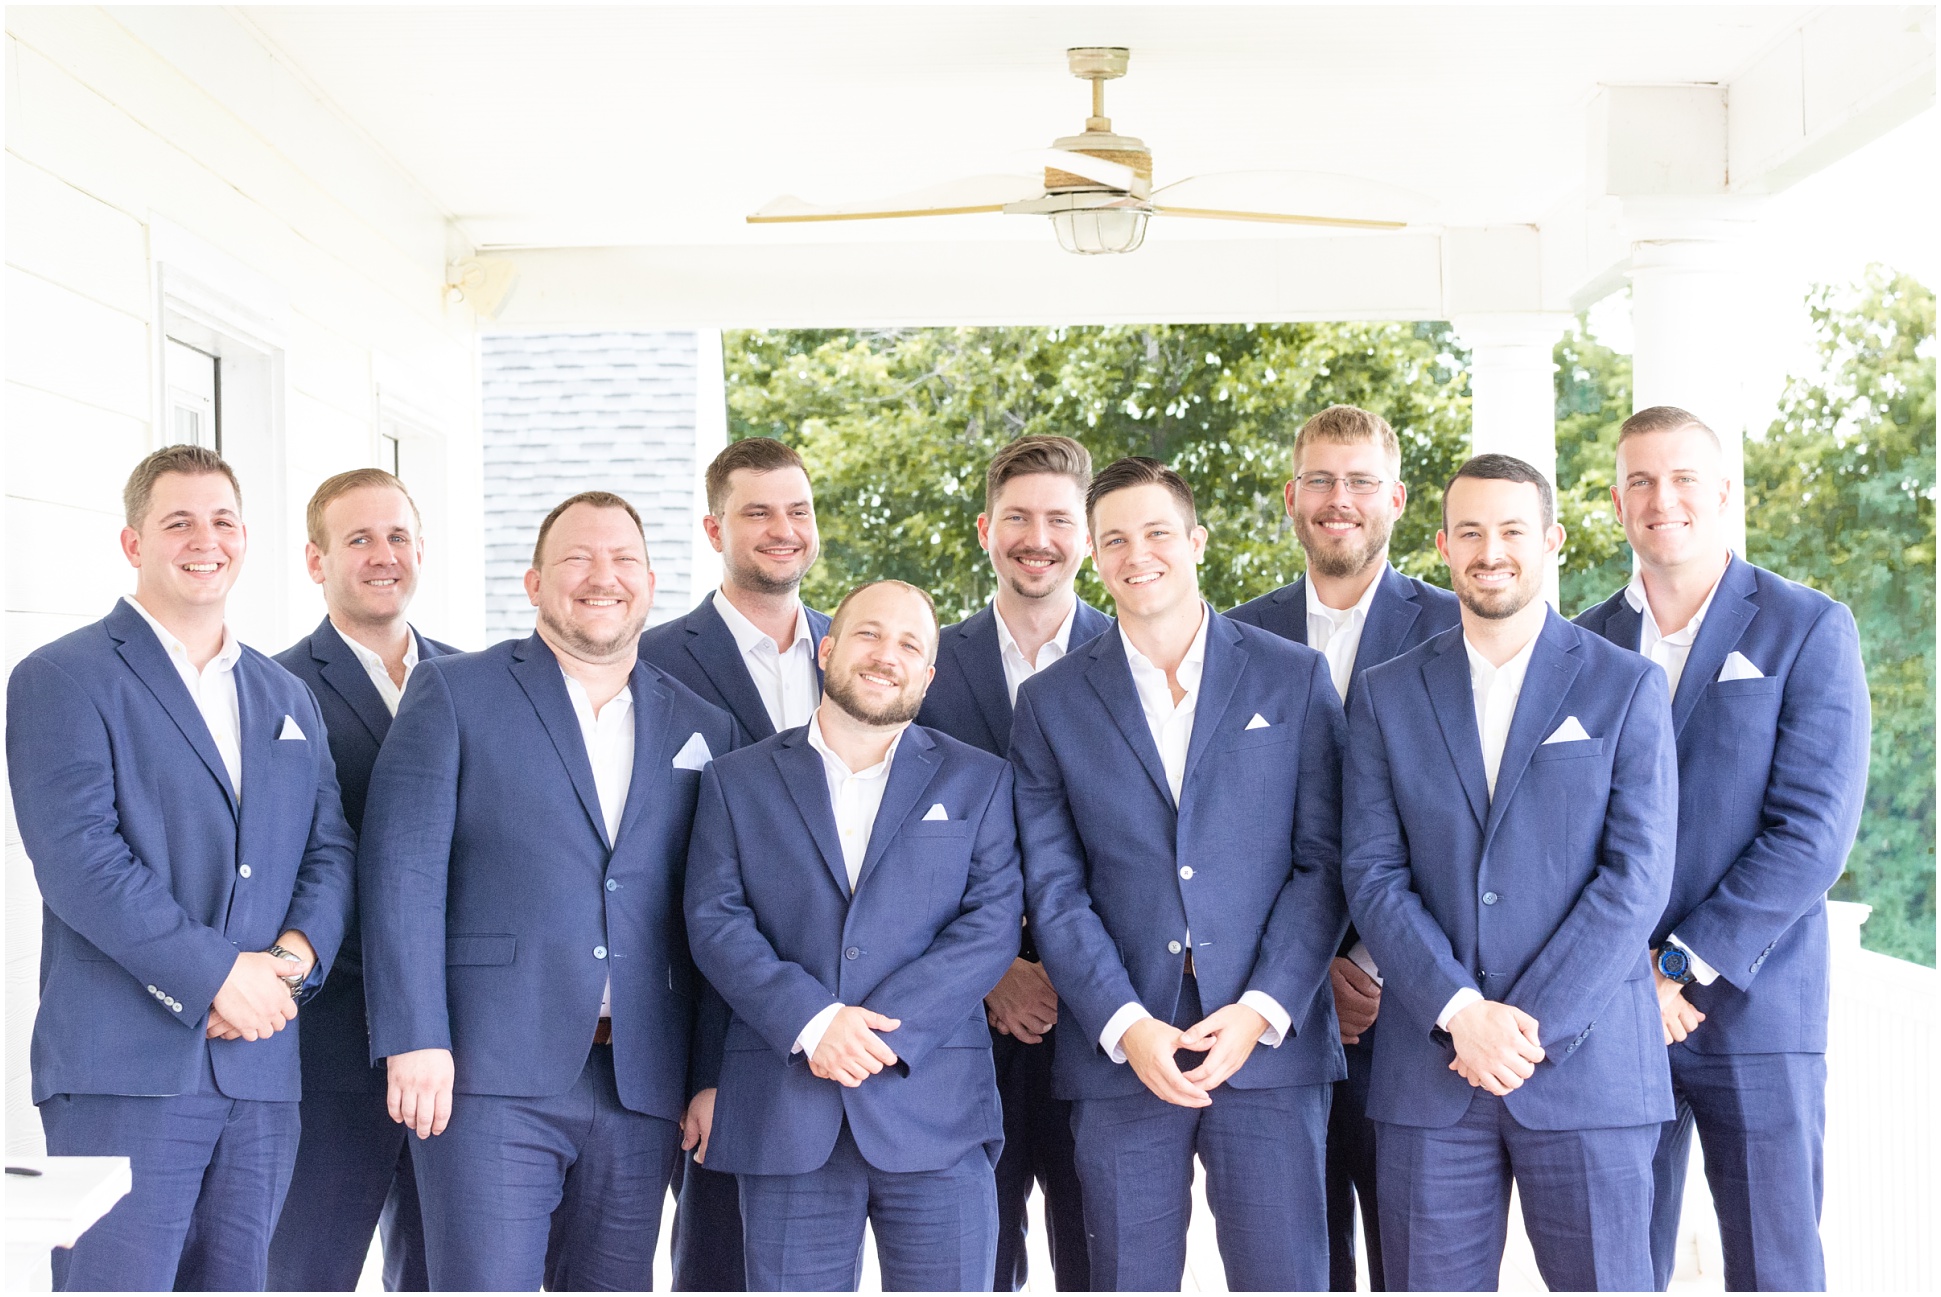 Groomsmen and Groom together on the porch